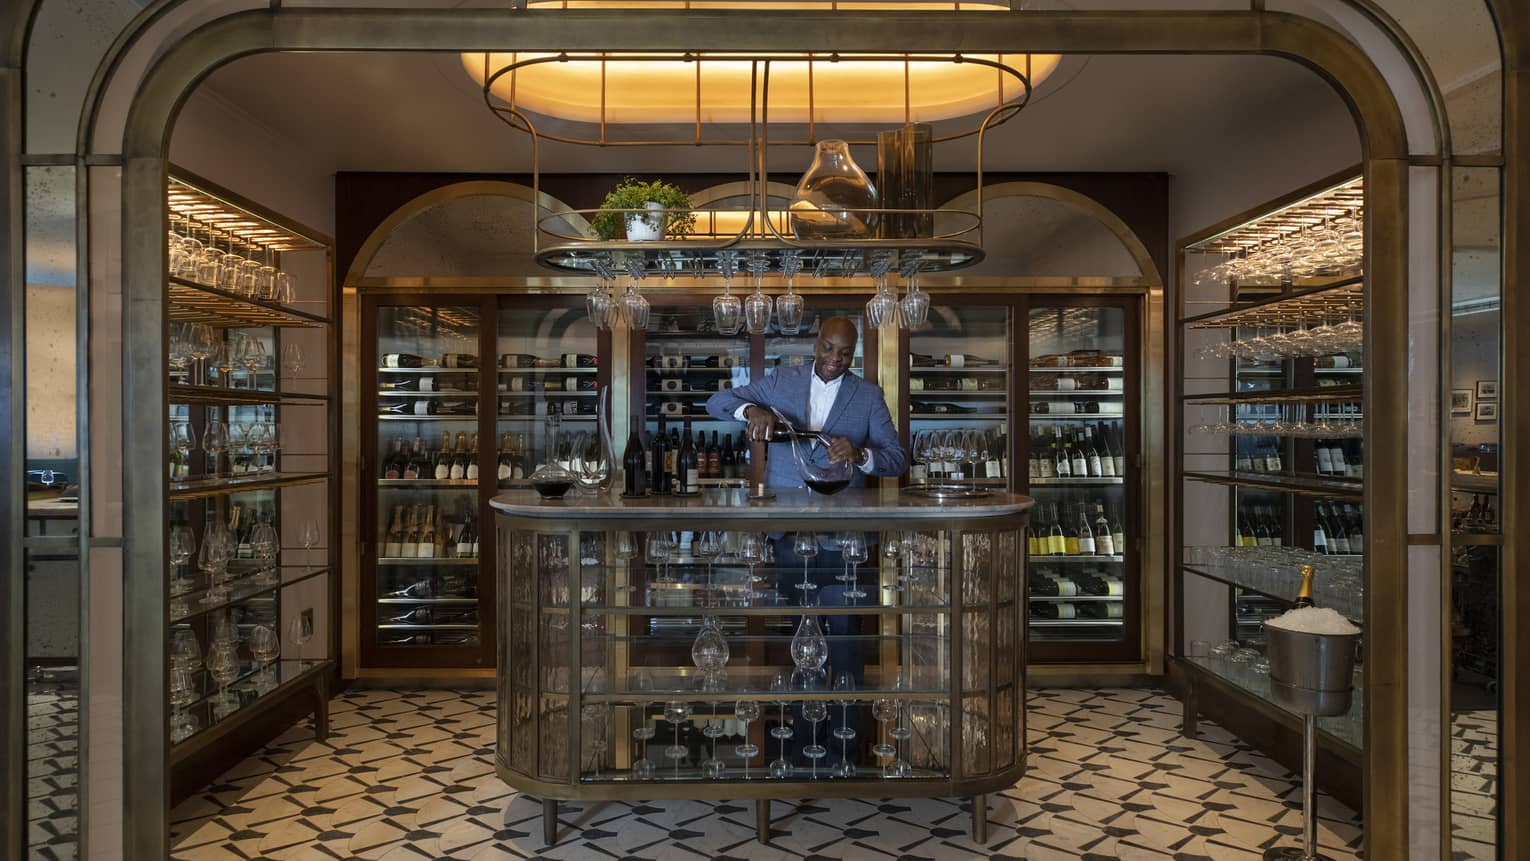 Bar serving wine in a special wine room, lines with refrigerated shelves